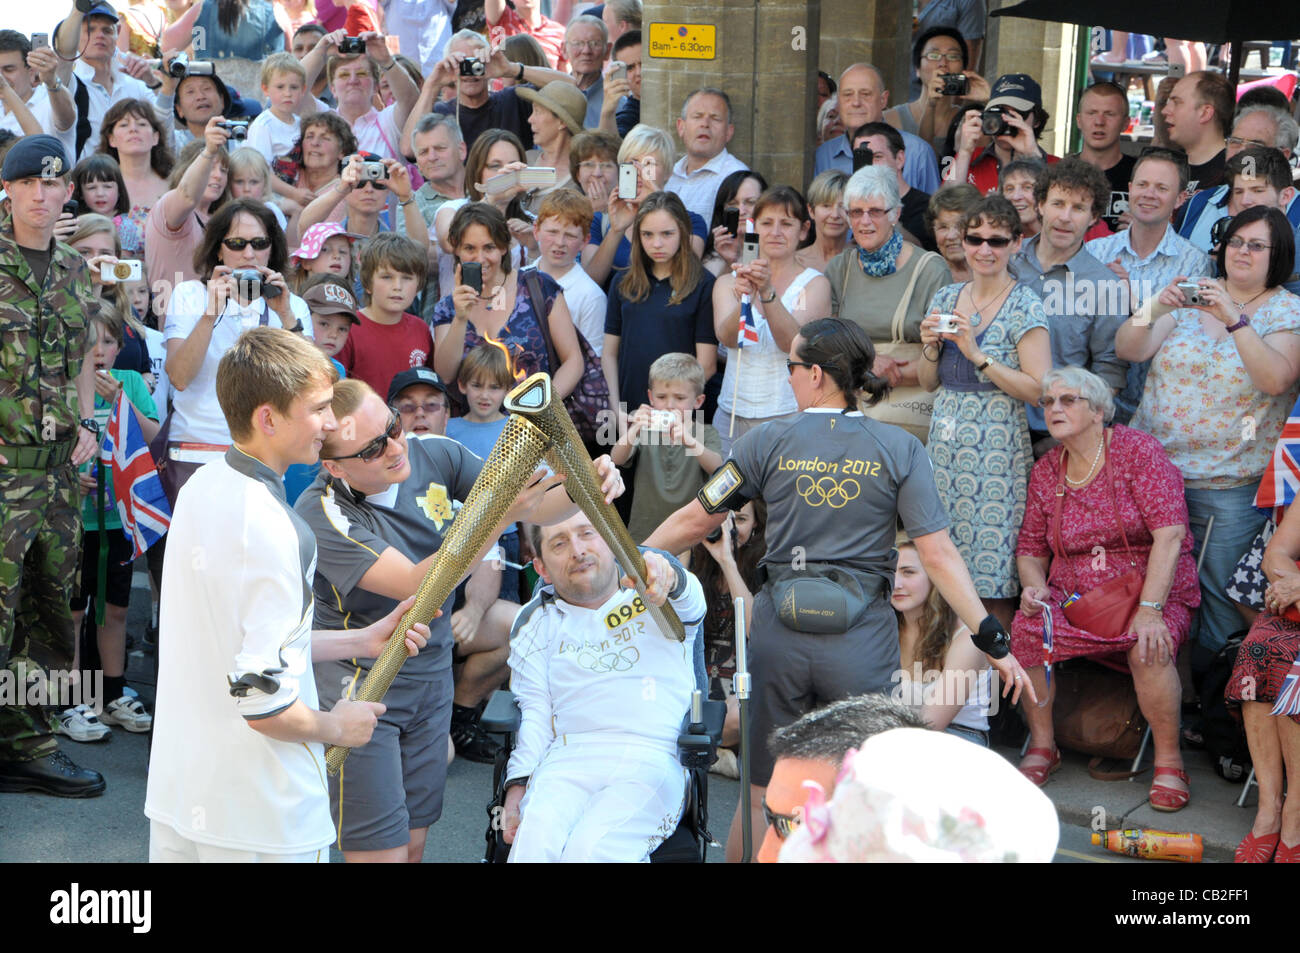 Thousands of people of all generations came together to celebrate the olympic torch passing through the the cotswold town of cirencester uk on wednesday 23rd may 2012.The sun shone to help create a really good party atmosphere.jake ashton year 10 deer park student hands the flame over to mark chard. Stock Photo